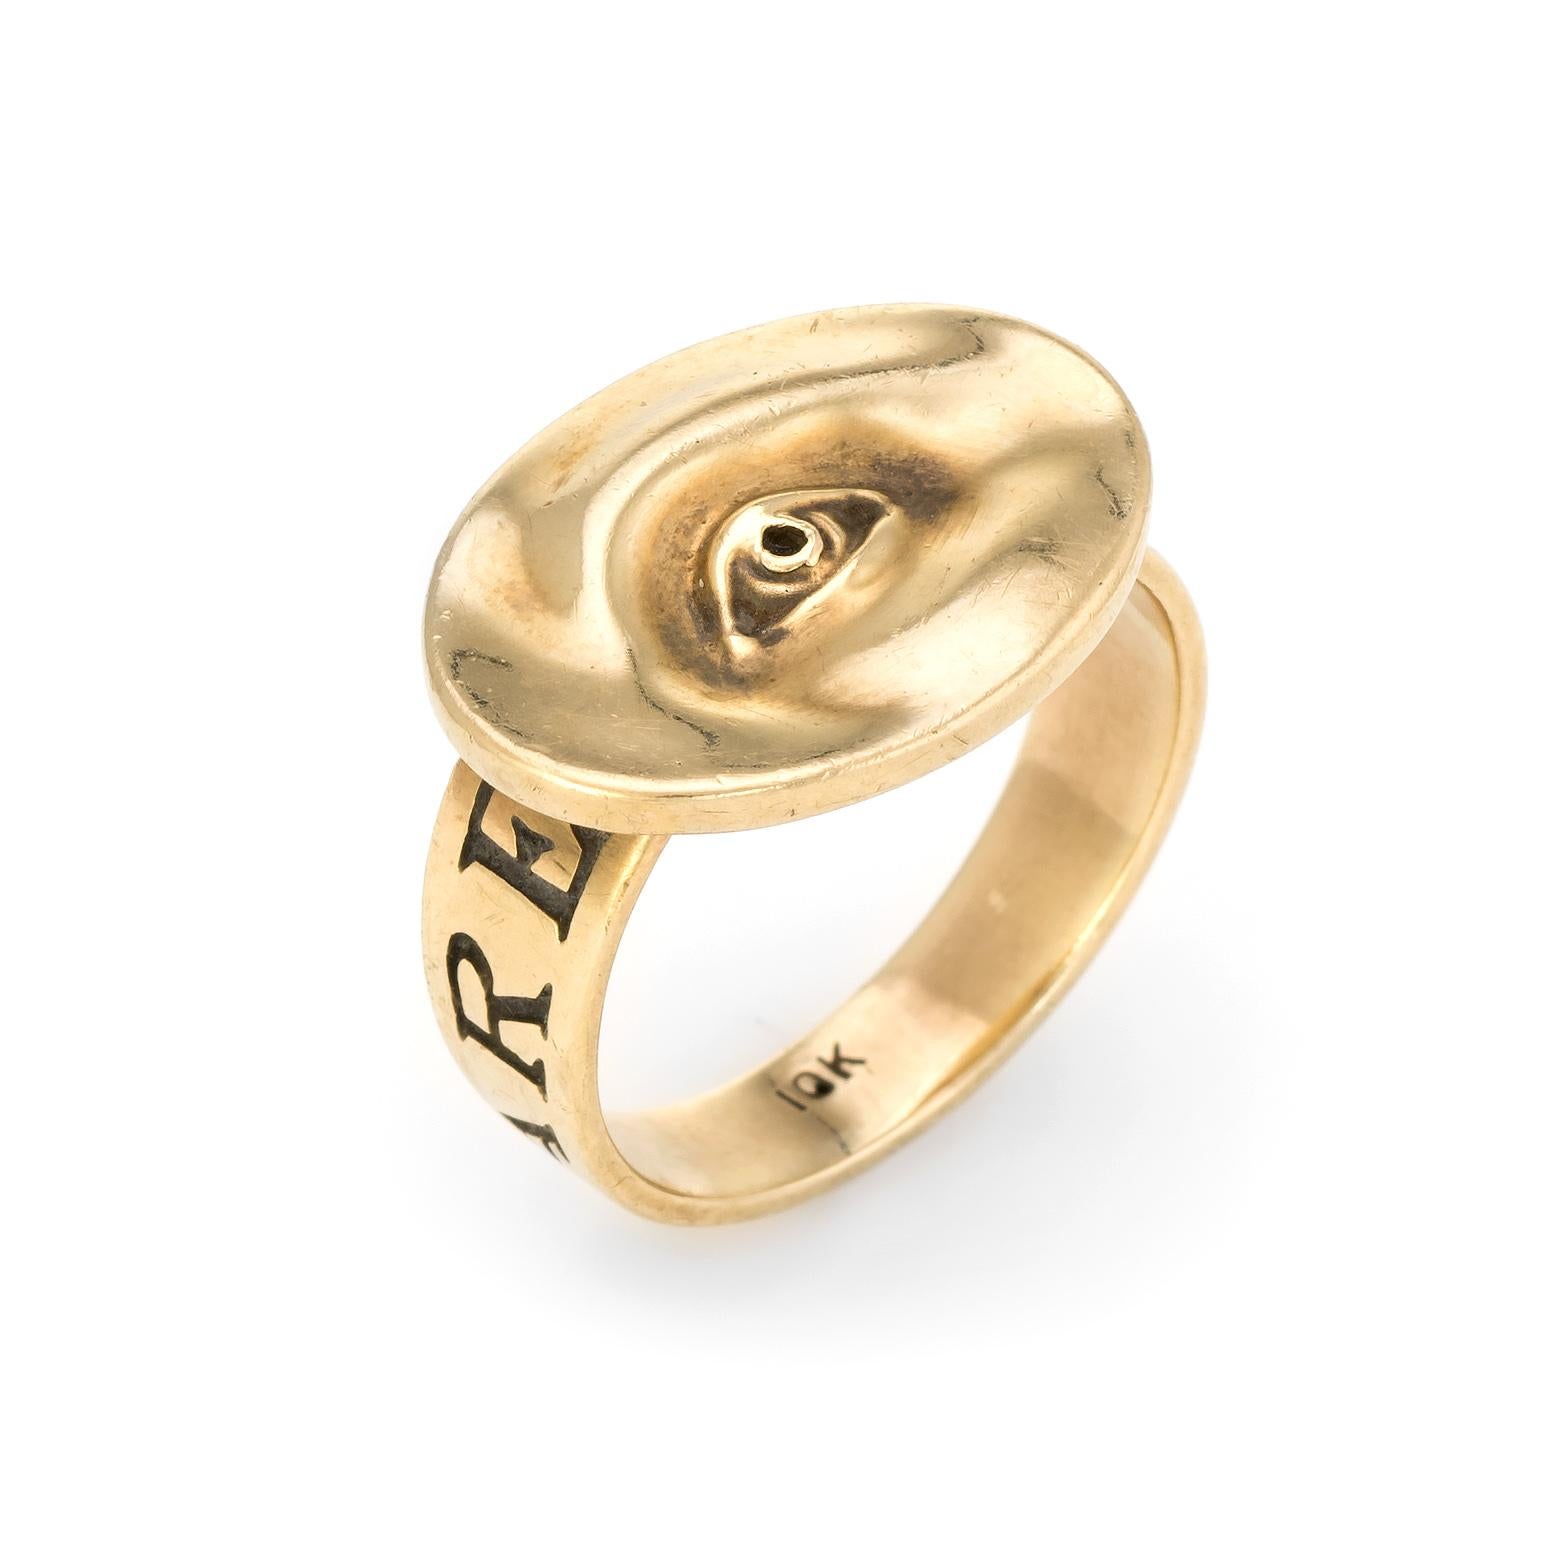 Finely detailed estate Gabriella kiss eye ring, crafted in 10 karat yellow gold.  
Bold and distinct design abounds with the eye ring. The love token series was inspired by the 19th century tradition of giving a painted eye to a loved one. The band